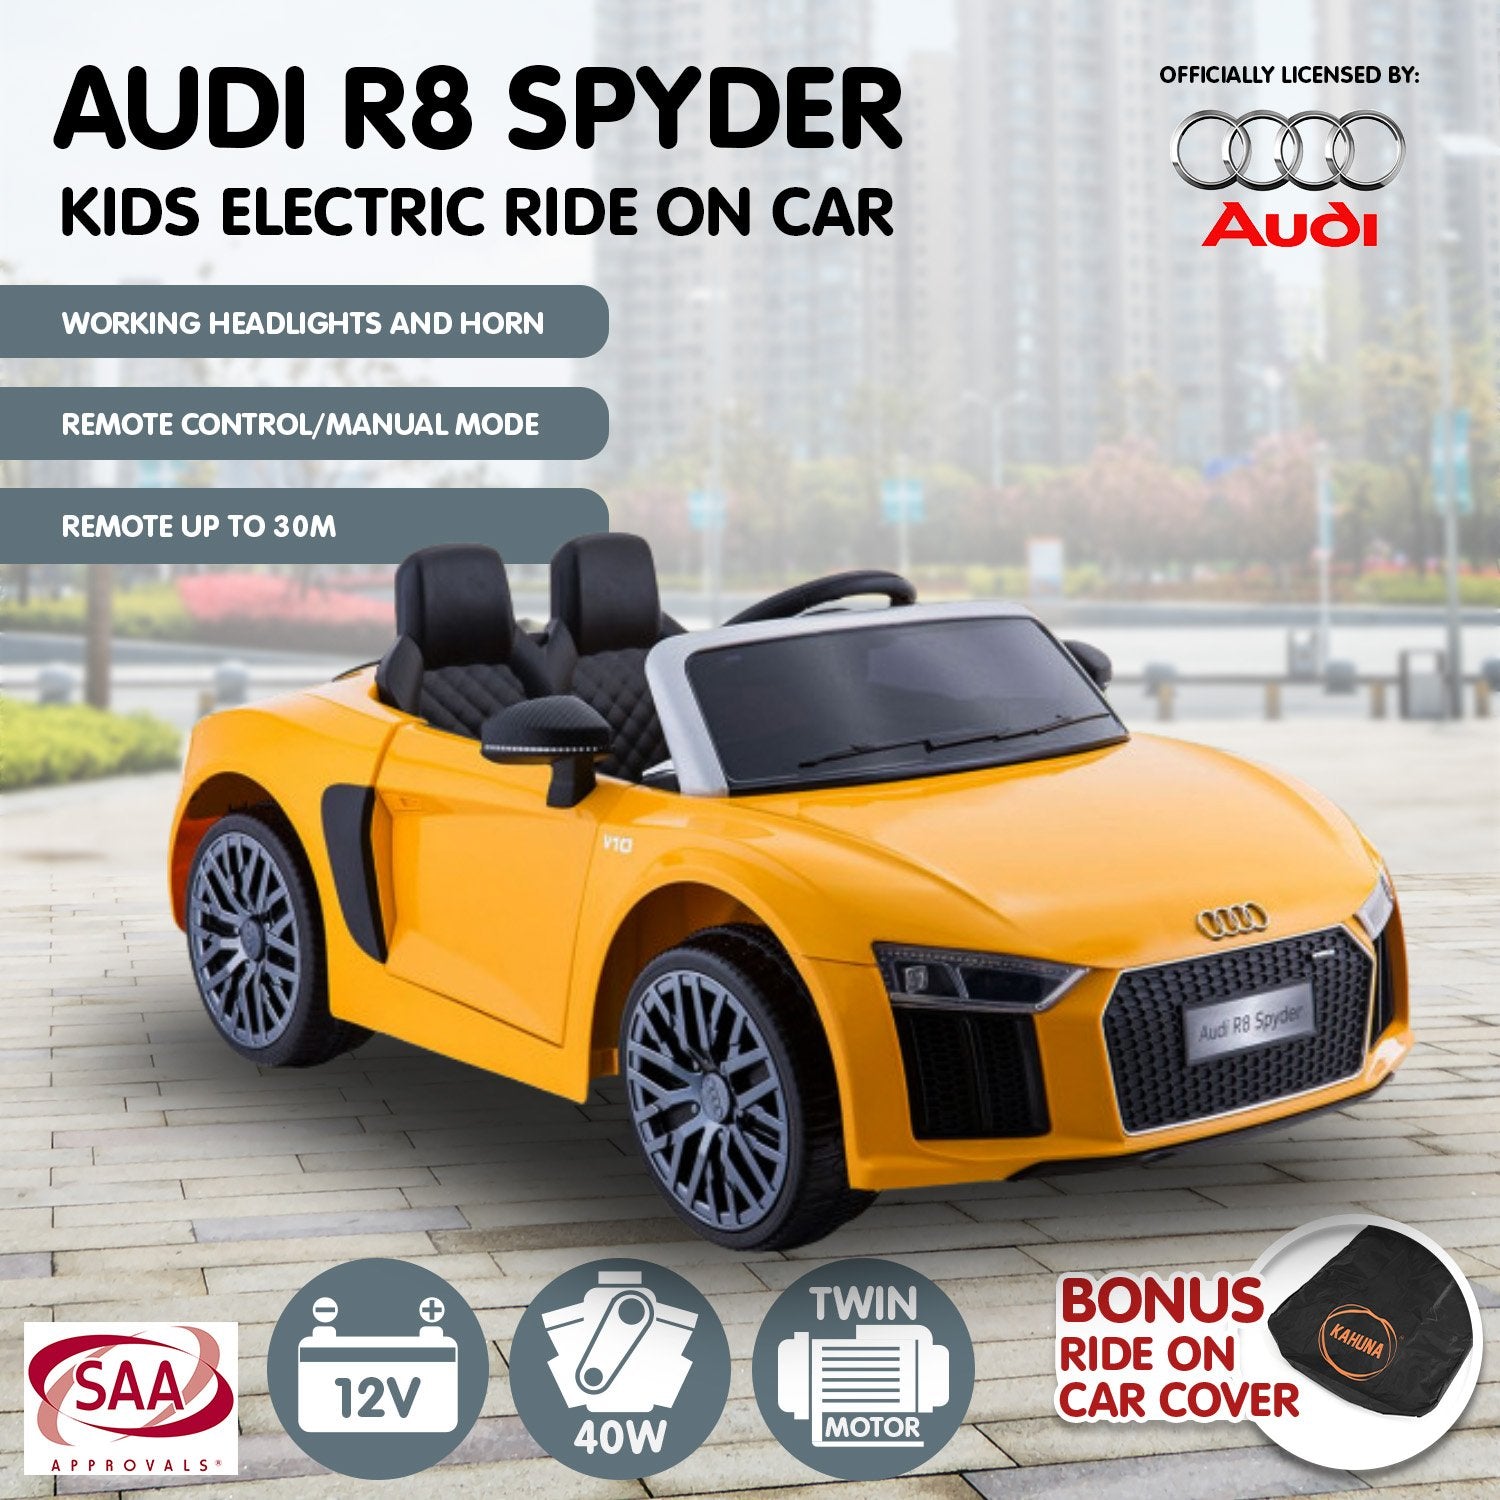 Kahuna R8 Spyder Audi Licensed Kids Electric Ride On Car Remote Control - Yellow